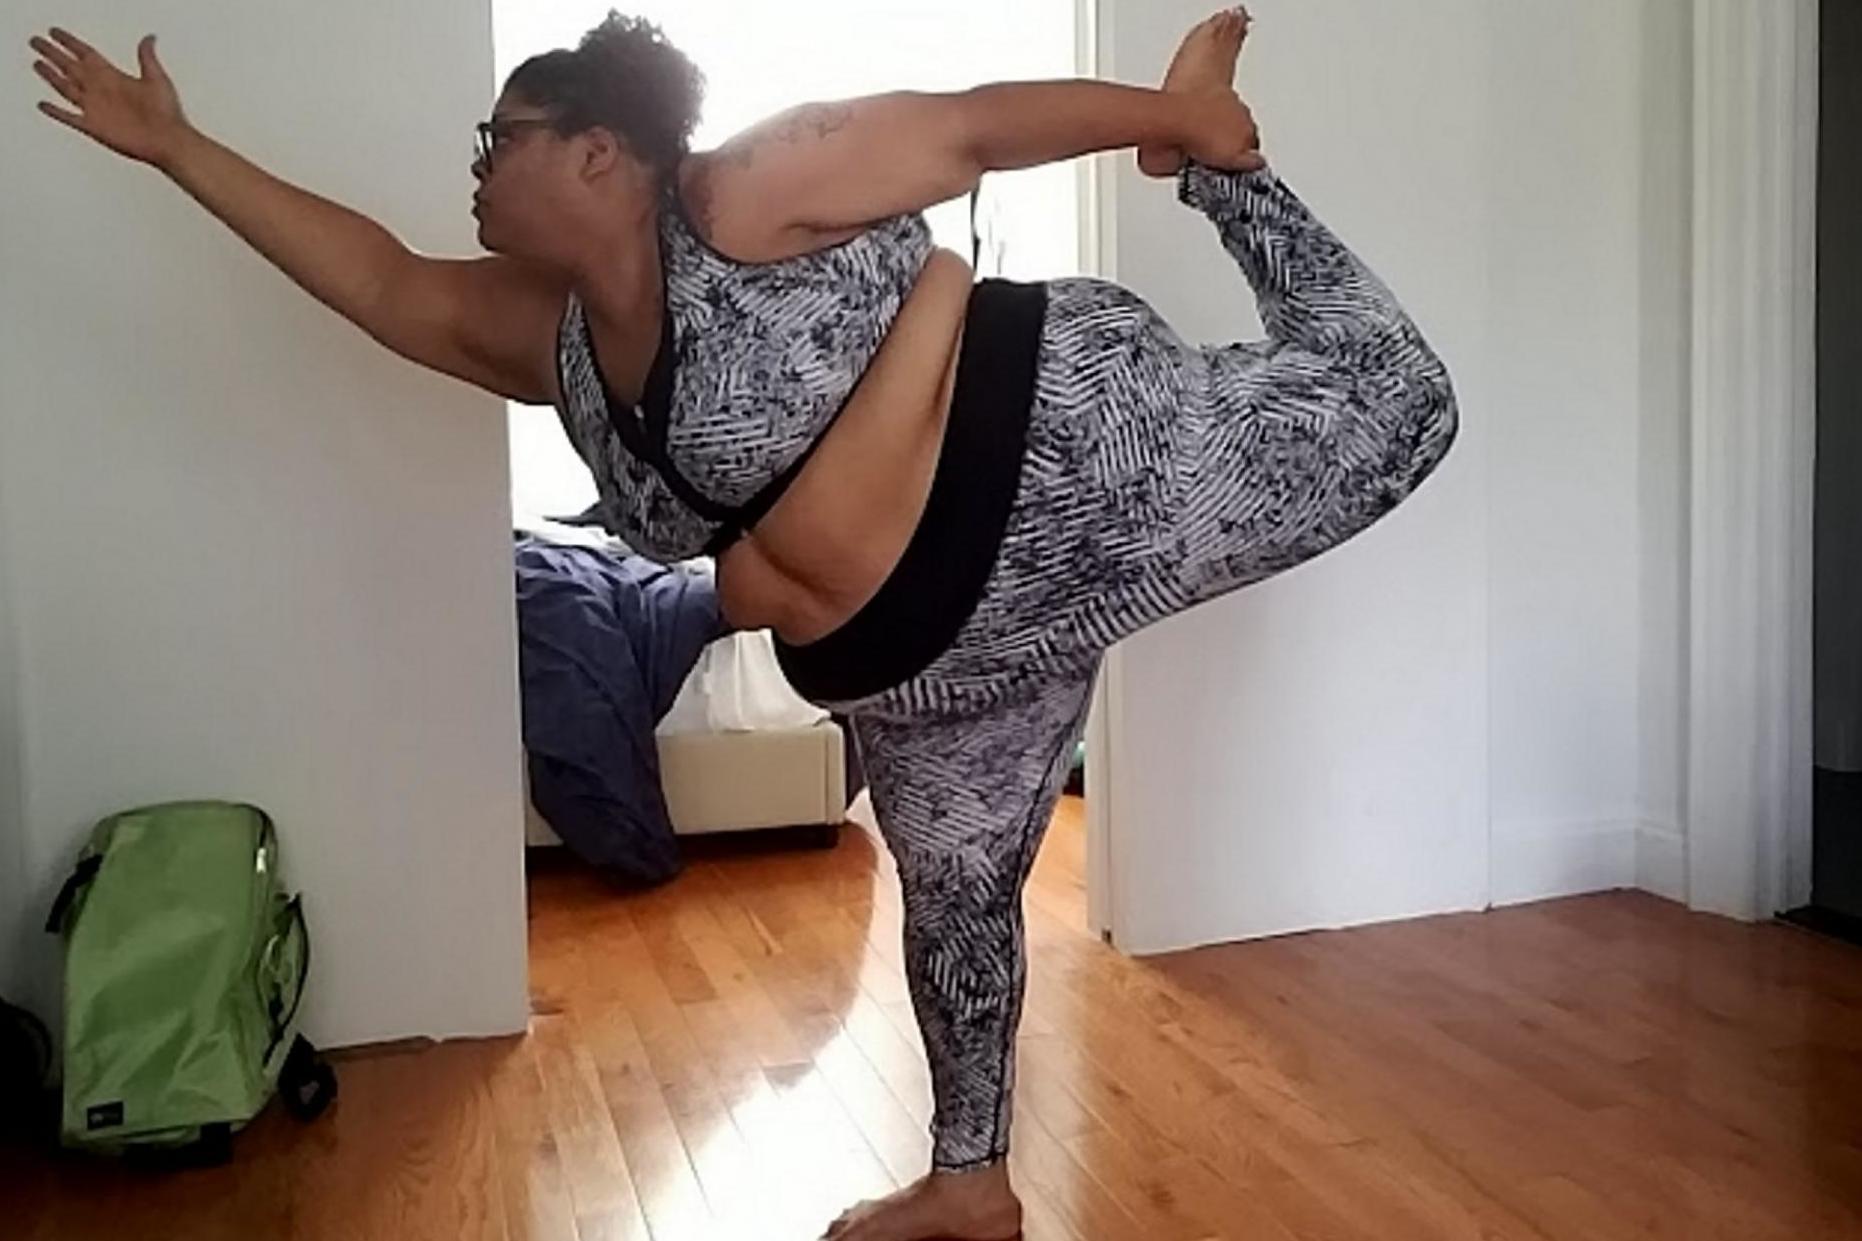 Plus-size woman becomes yoga teacher after noticing lack of